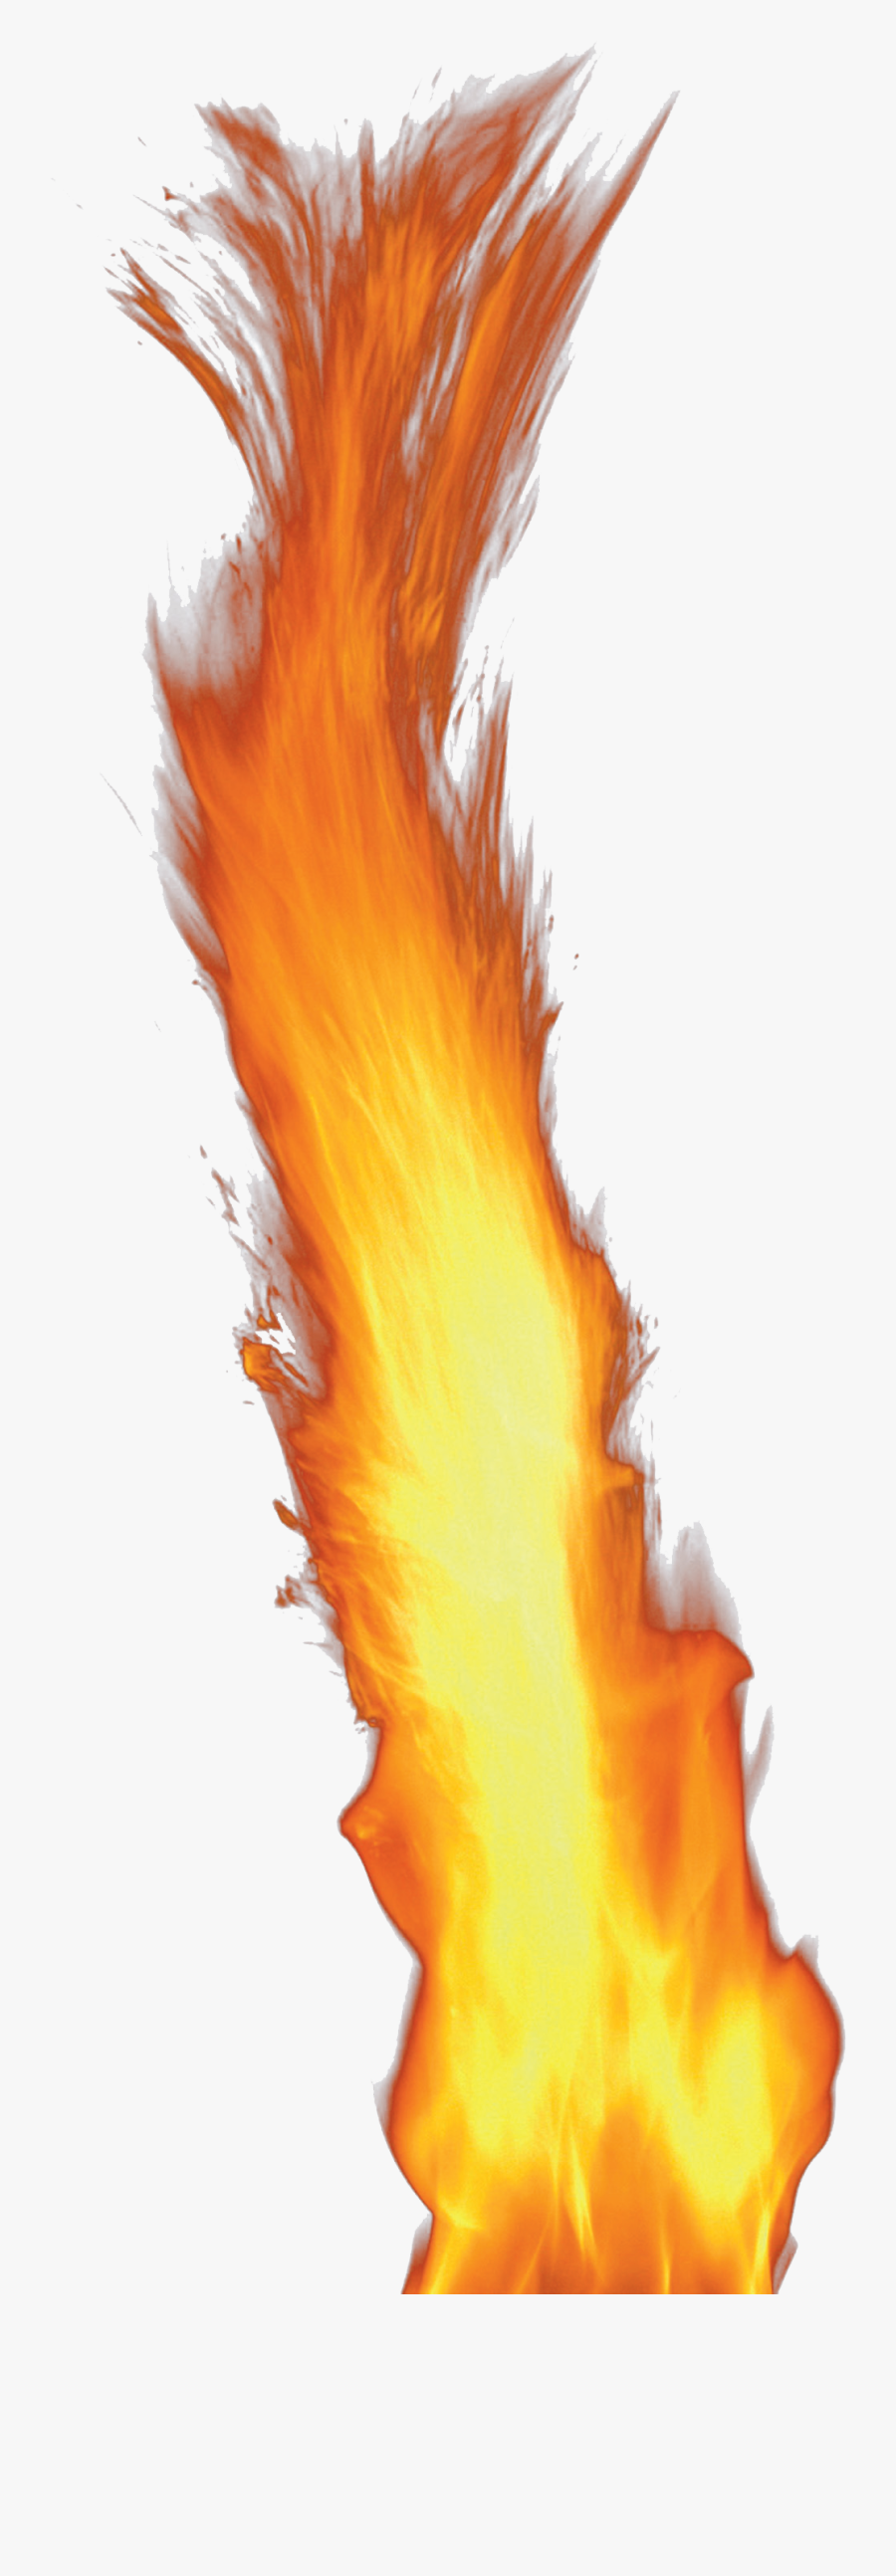 Fire Flame Png Image - Transparent Background Fire Png Gif, Transparent Clipart